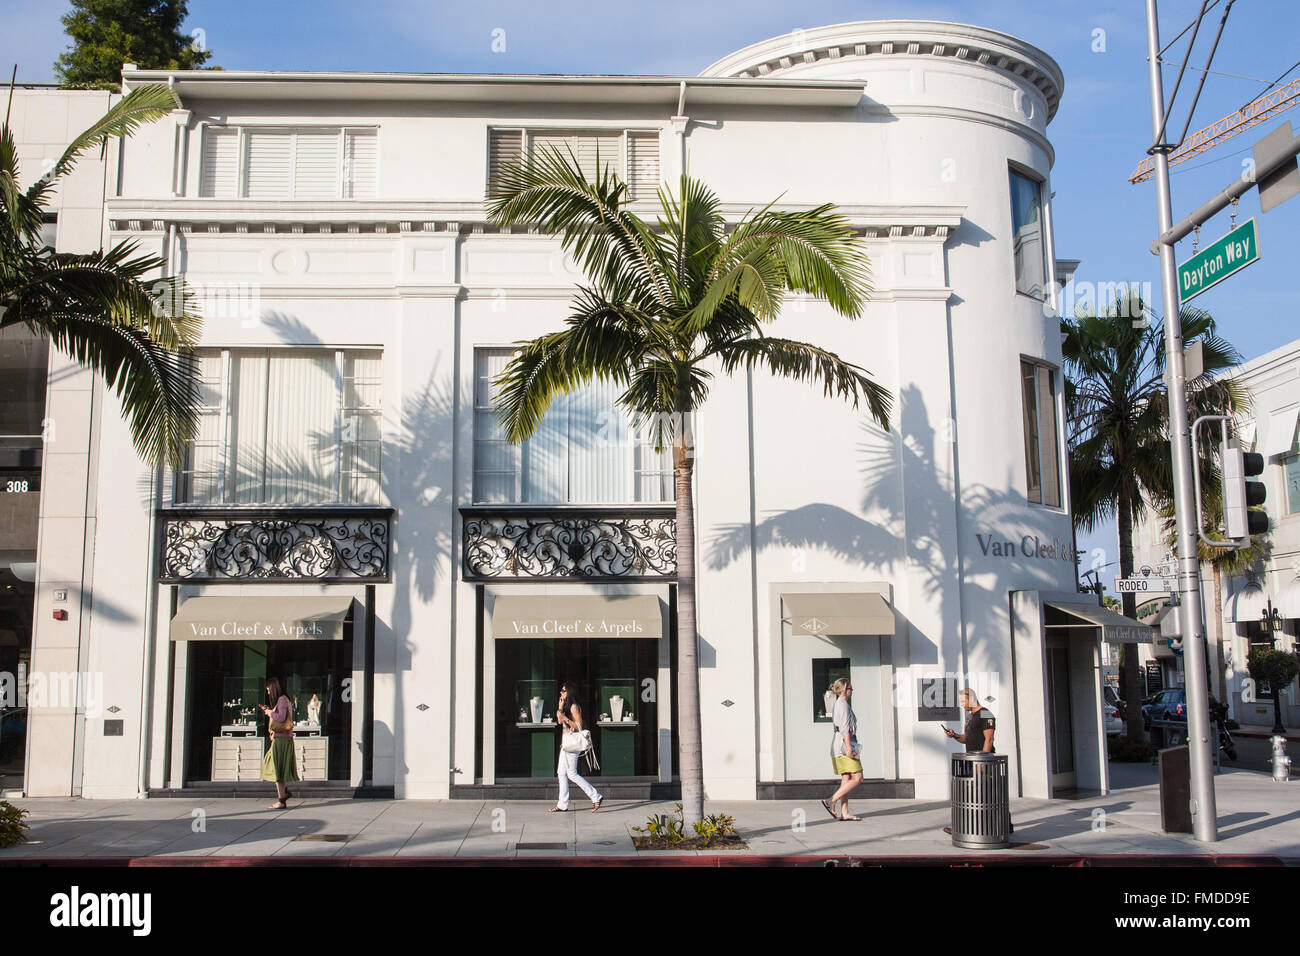 Rodeo Drive - The stunning CHANEL store at the corner of Rodeo Drive and  Brighton Way!